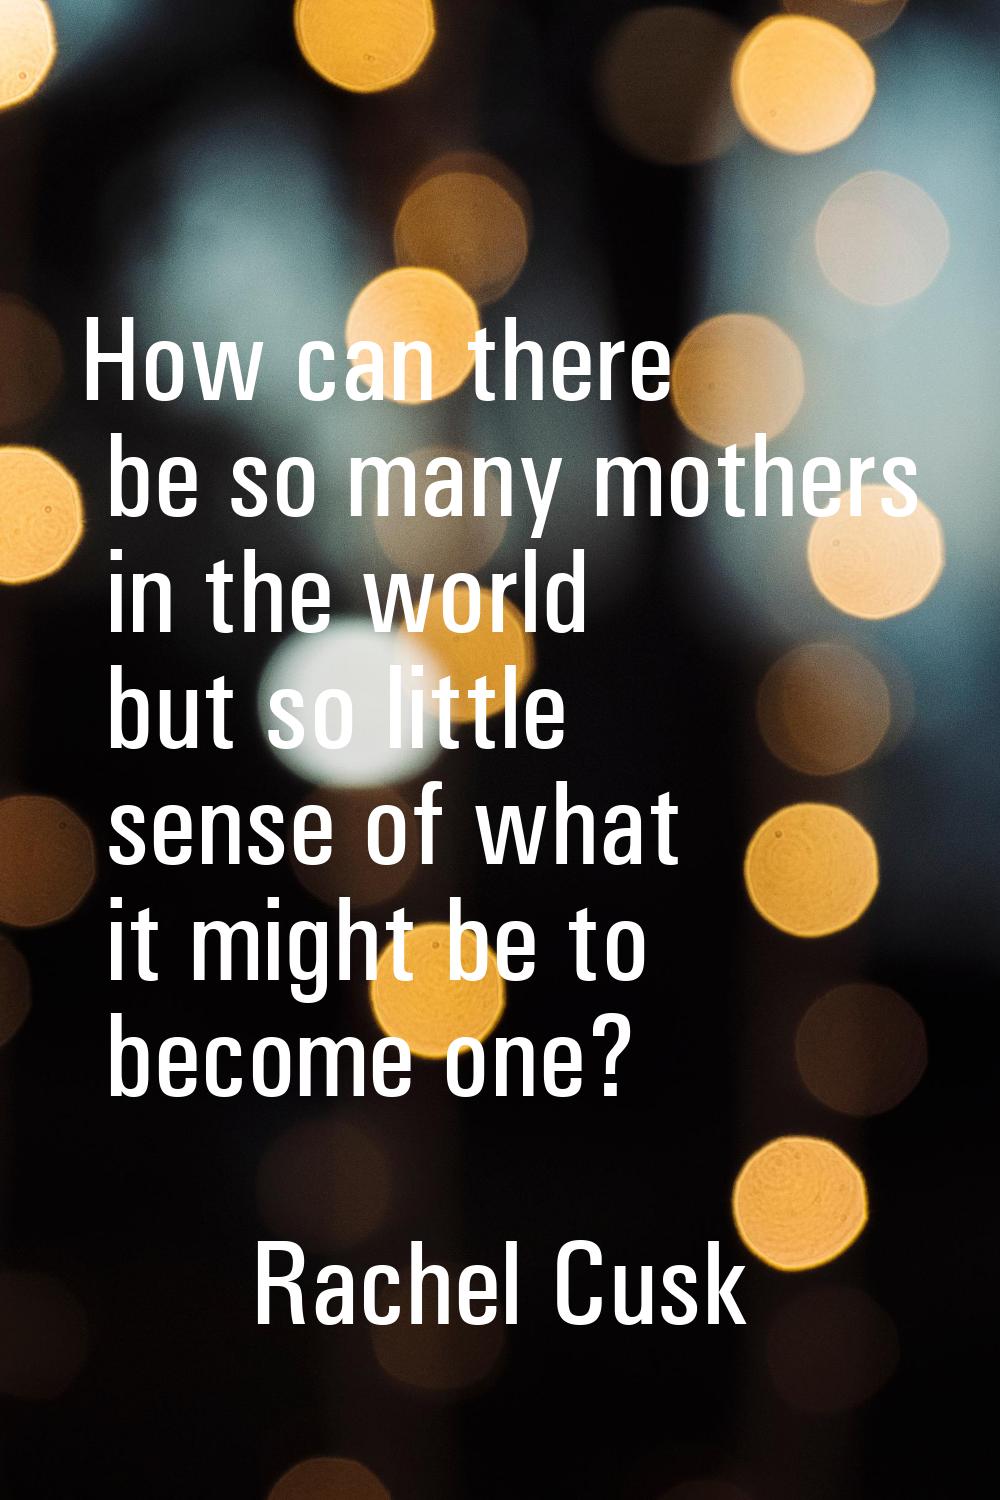 How can there be so many mothers in the world but so little sense of what it might be to become one